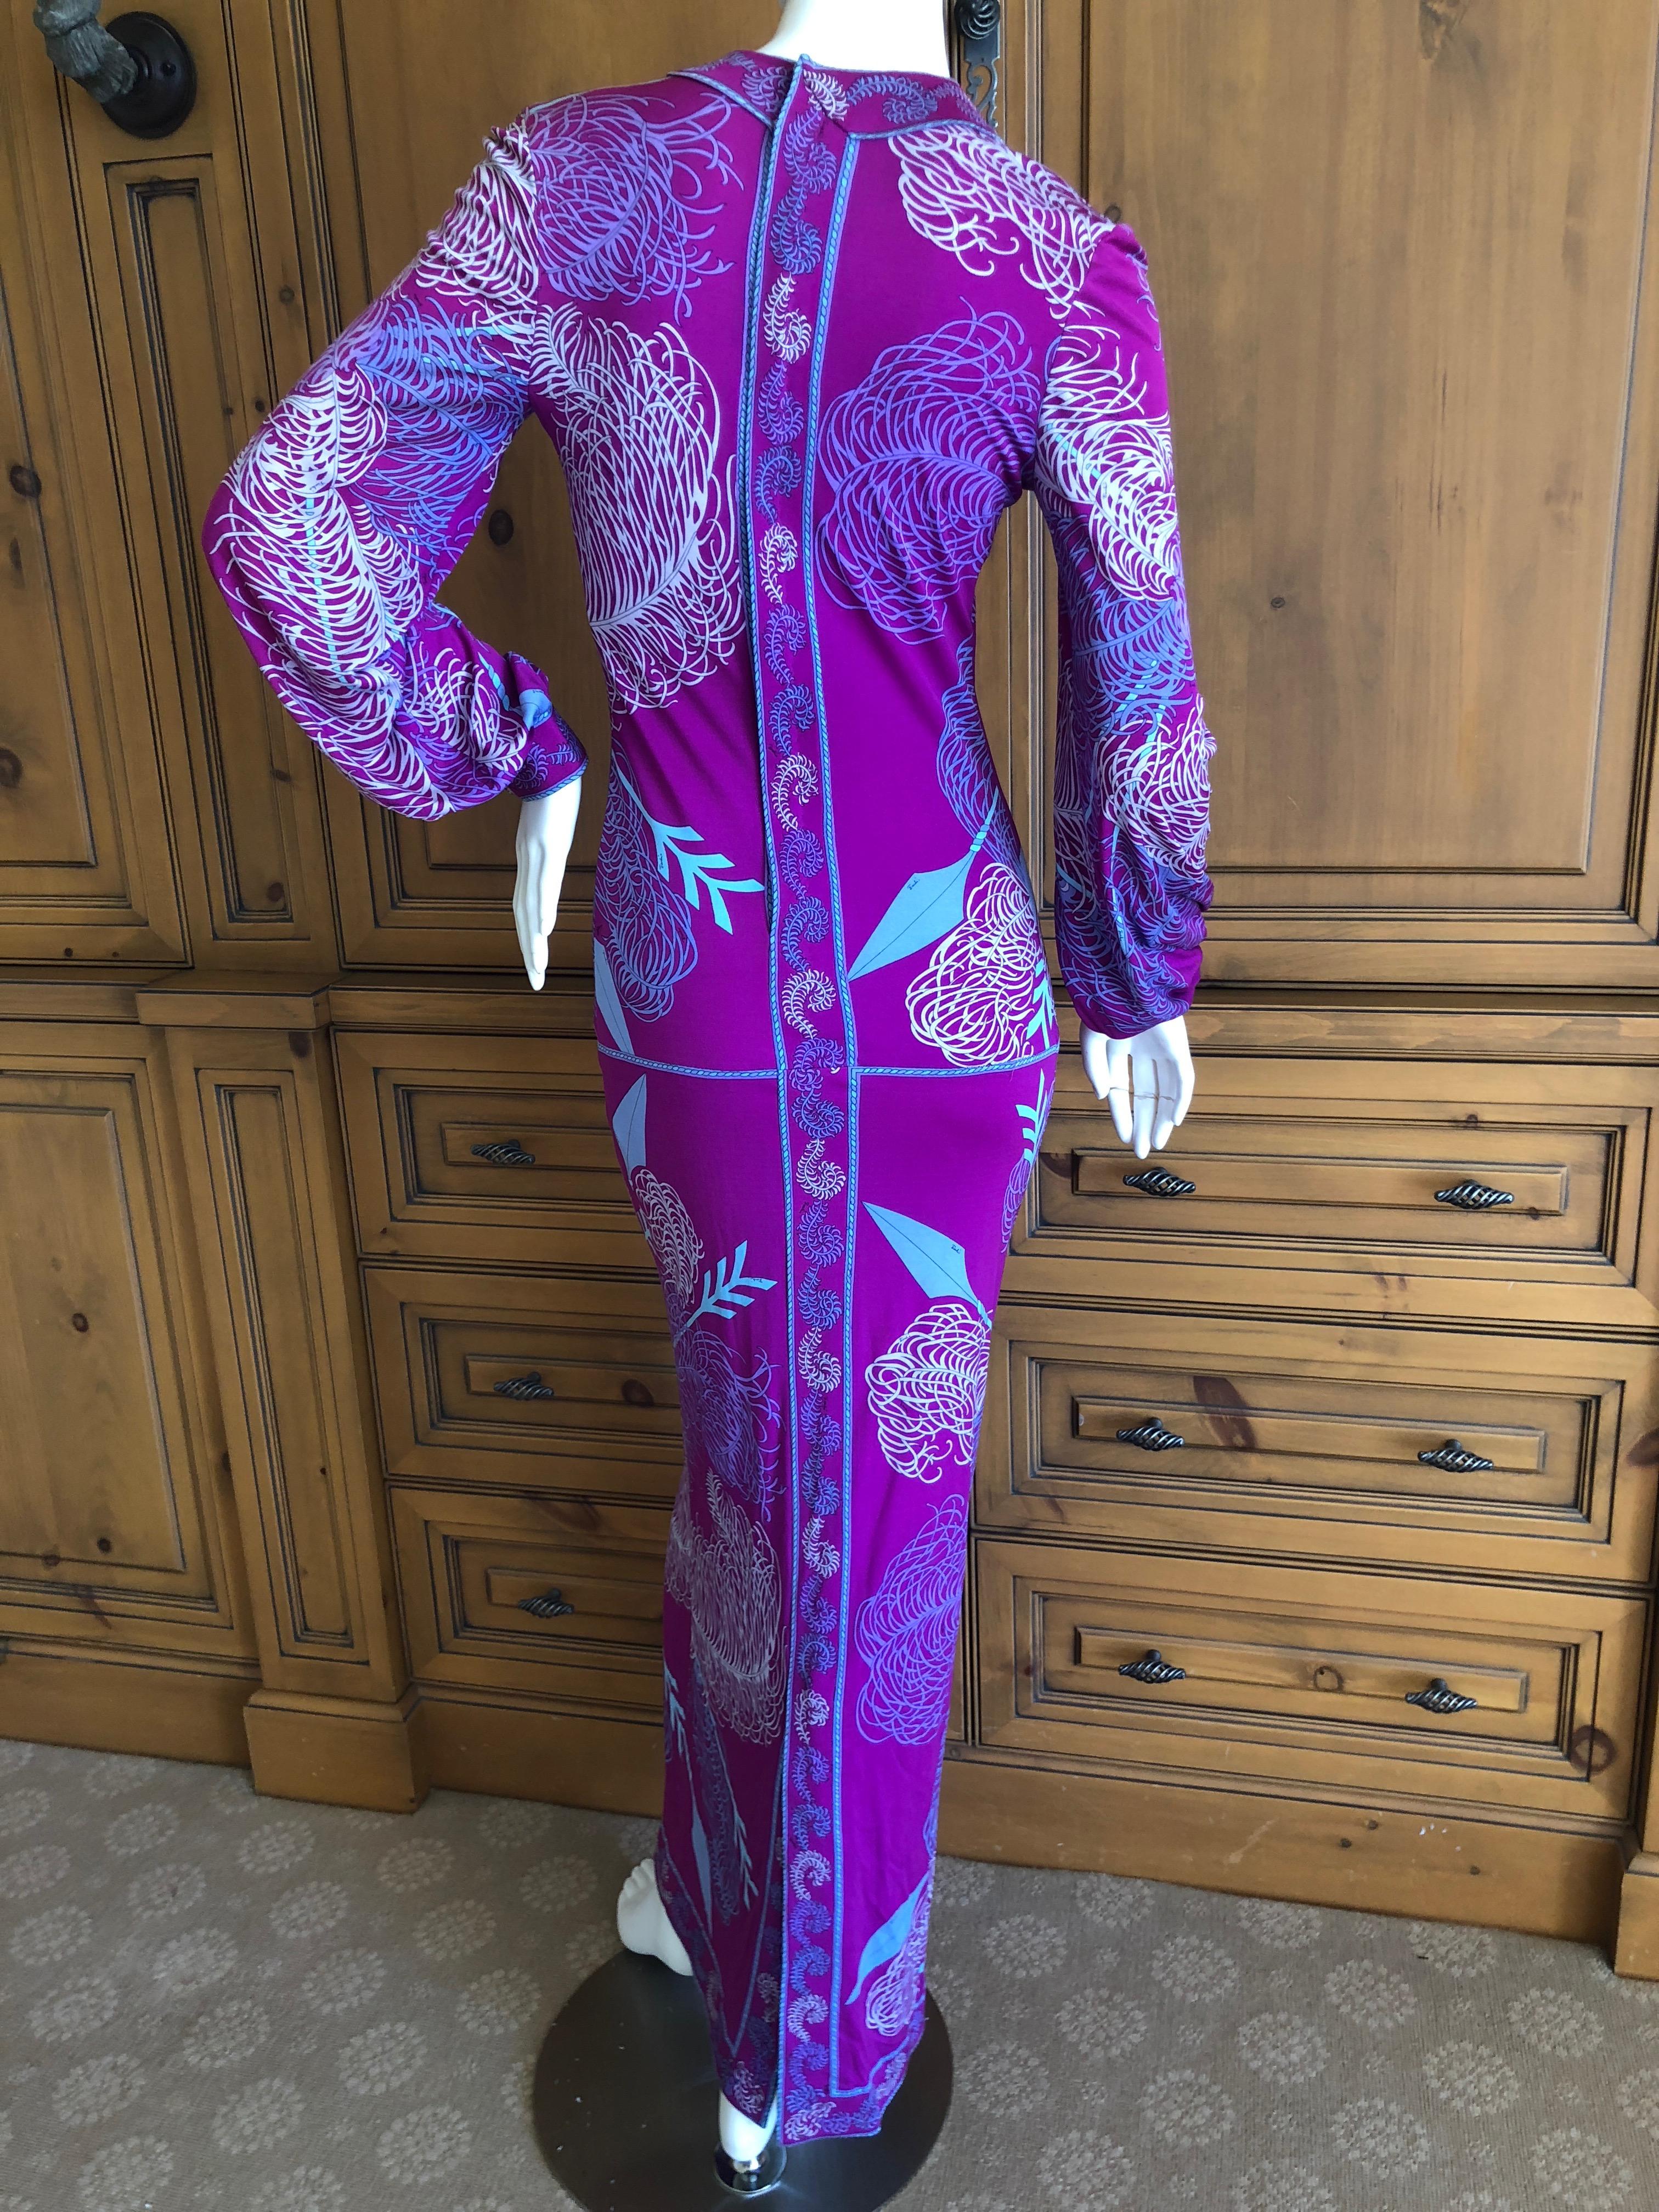 Emilio Pucci Vintage 1960's Silk Jersey Evening Dress for Saks Fifth Avenue For Sale 2